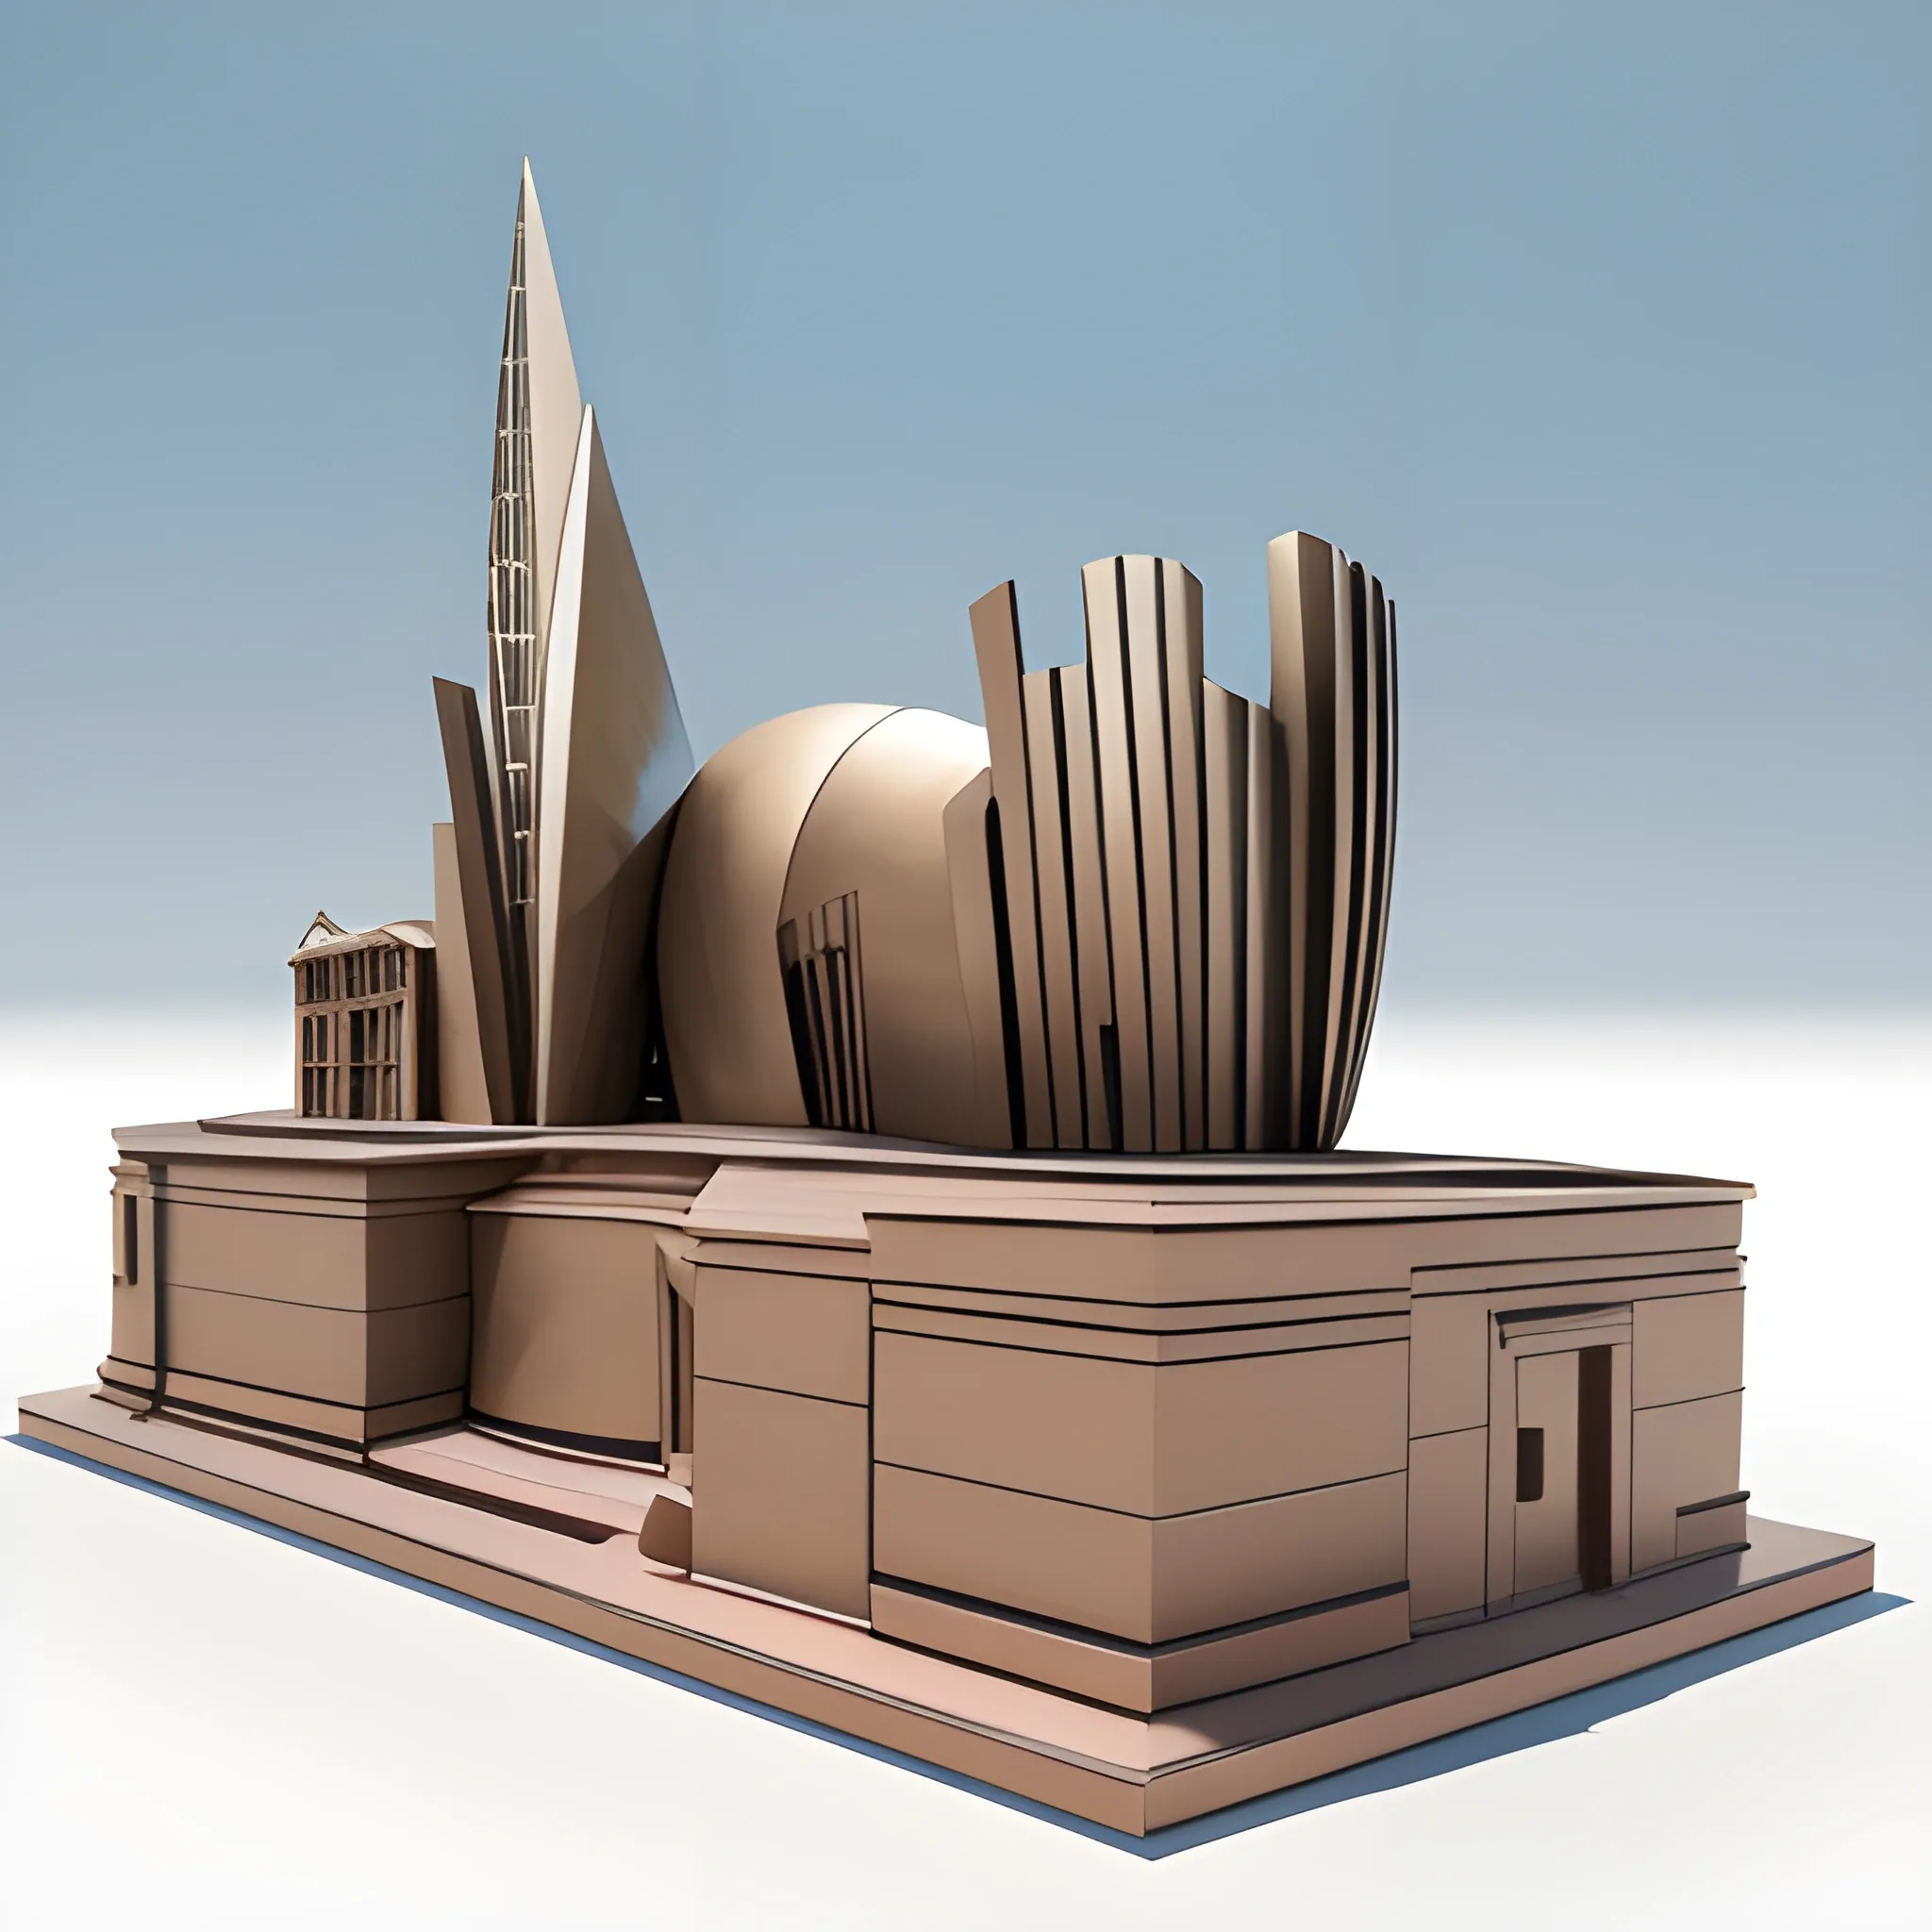 Create a monumental modern sculptured italian folk  feature with gown, toga concept , in  Frank Gehry style, Bronce material surface and brick base, asymetric composition, simple design as Bahaus style, minimal, geometric simplicity,  big locomotion expression,  blue sky background, pretty detailed HD render, classic base, fountain, 3D, 3D